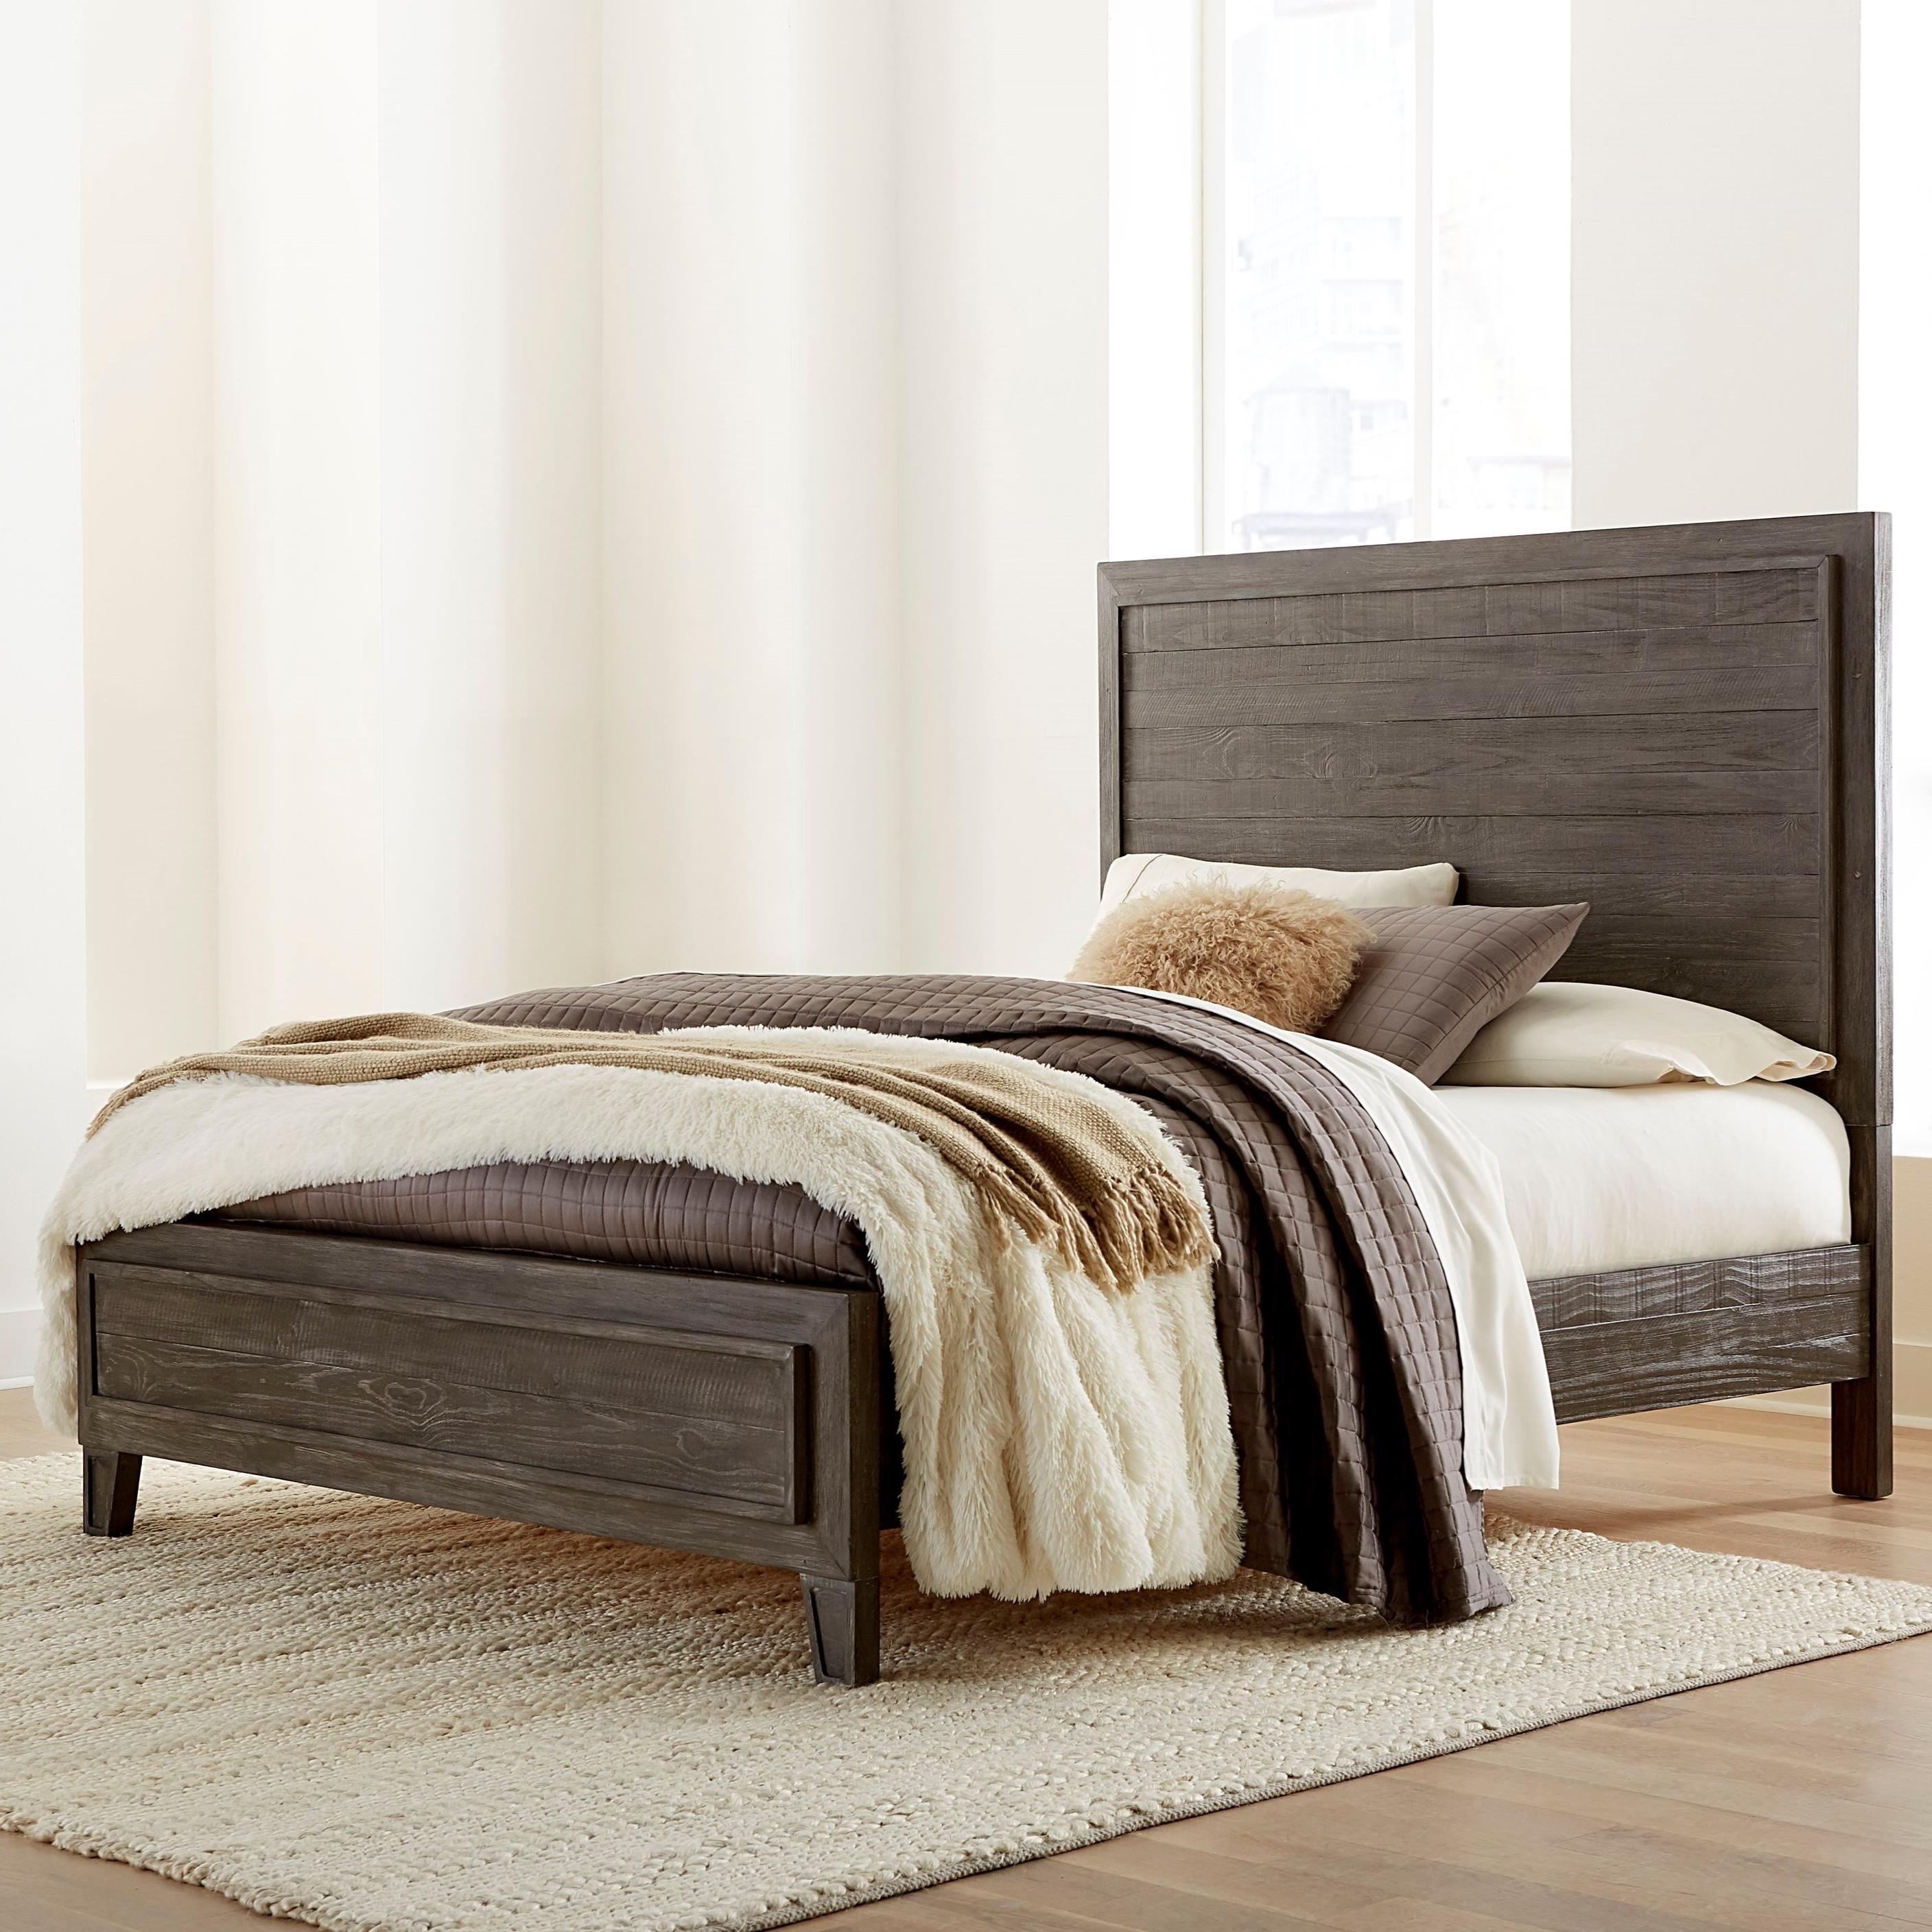 

    
Casual Rustic Style Onyx Finish Panel CAL King Bed HADLEY by Modus Furniture
